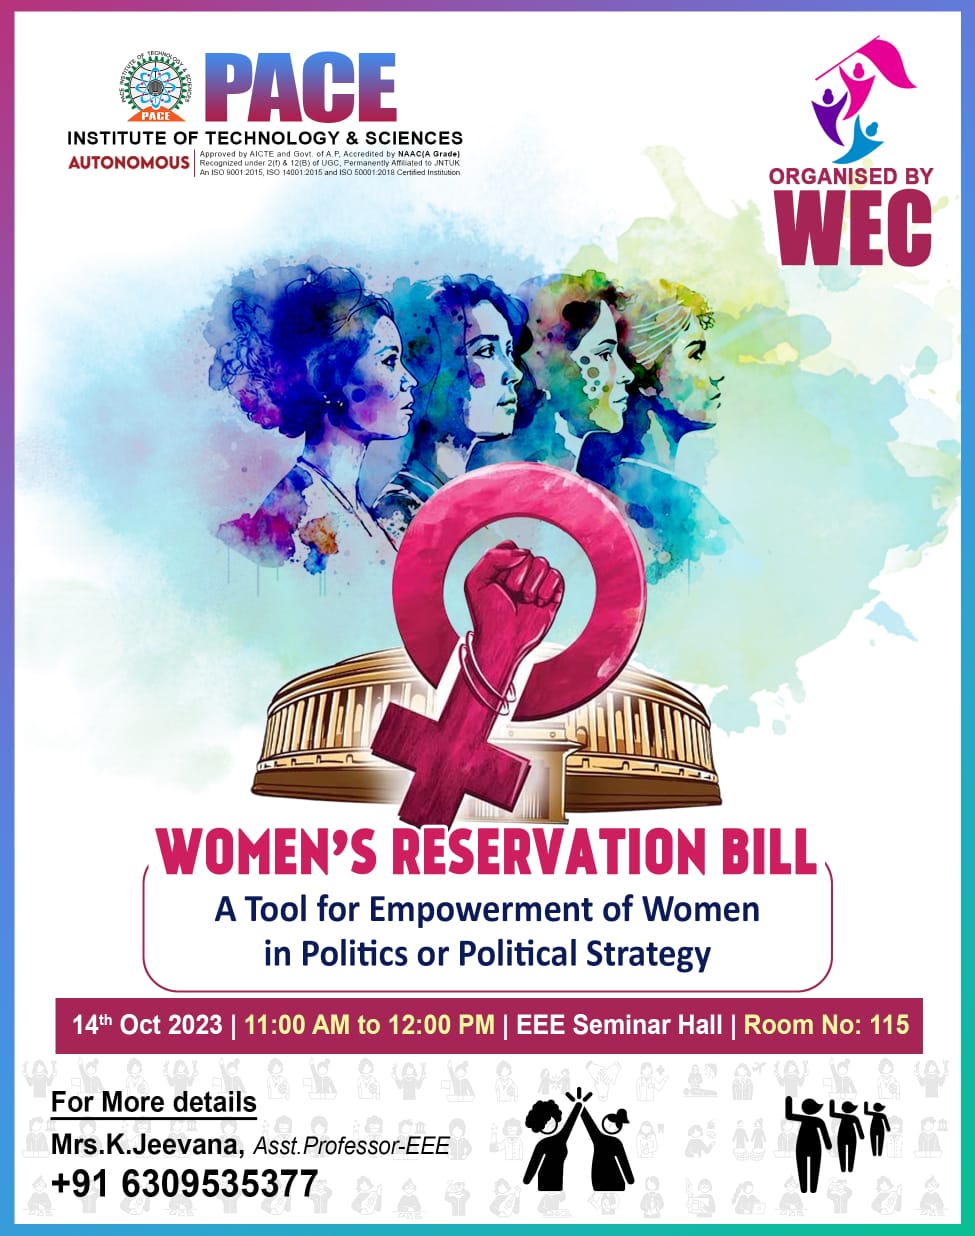 WEC held a debate competition on Women's Reservation Bill